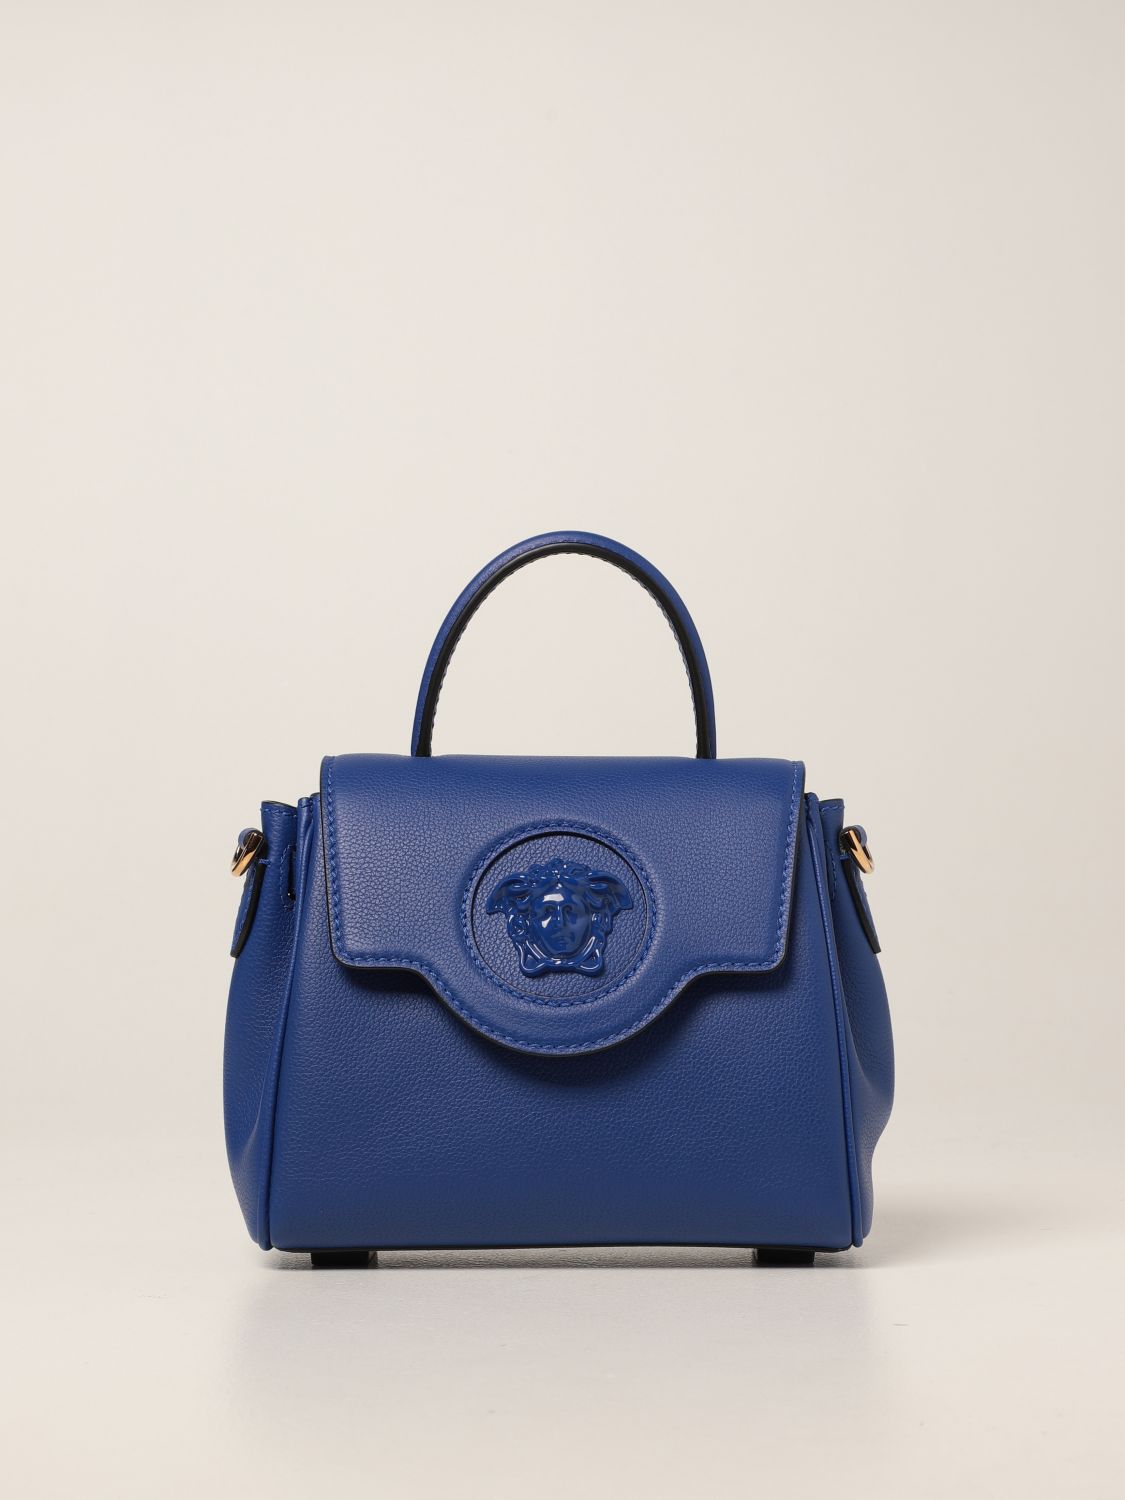 Versace Jeans Couture Crossbody Bag-Royal Blue